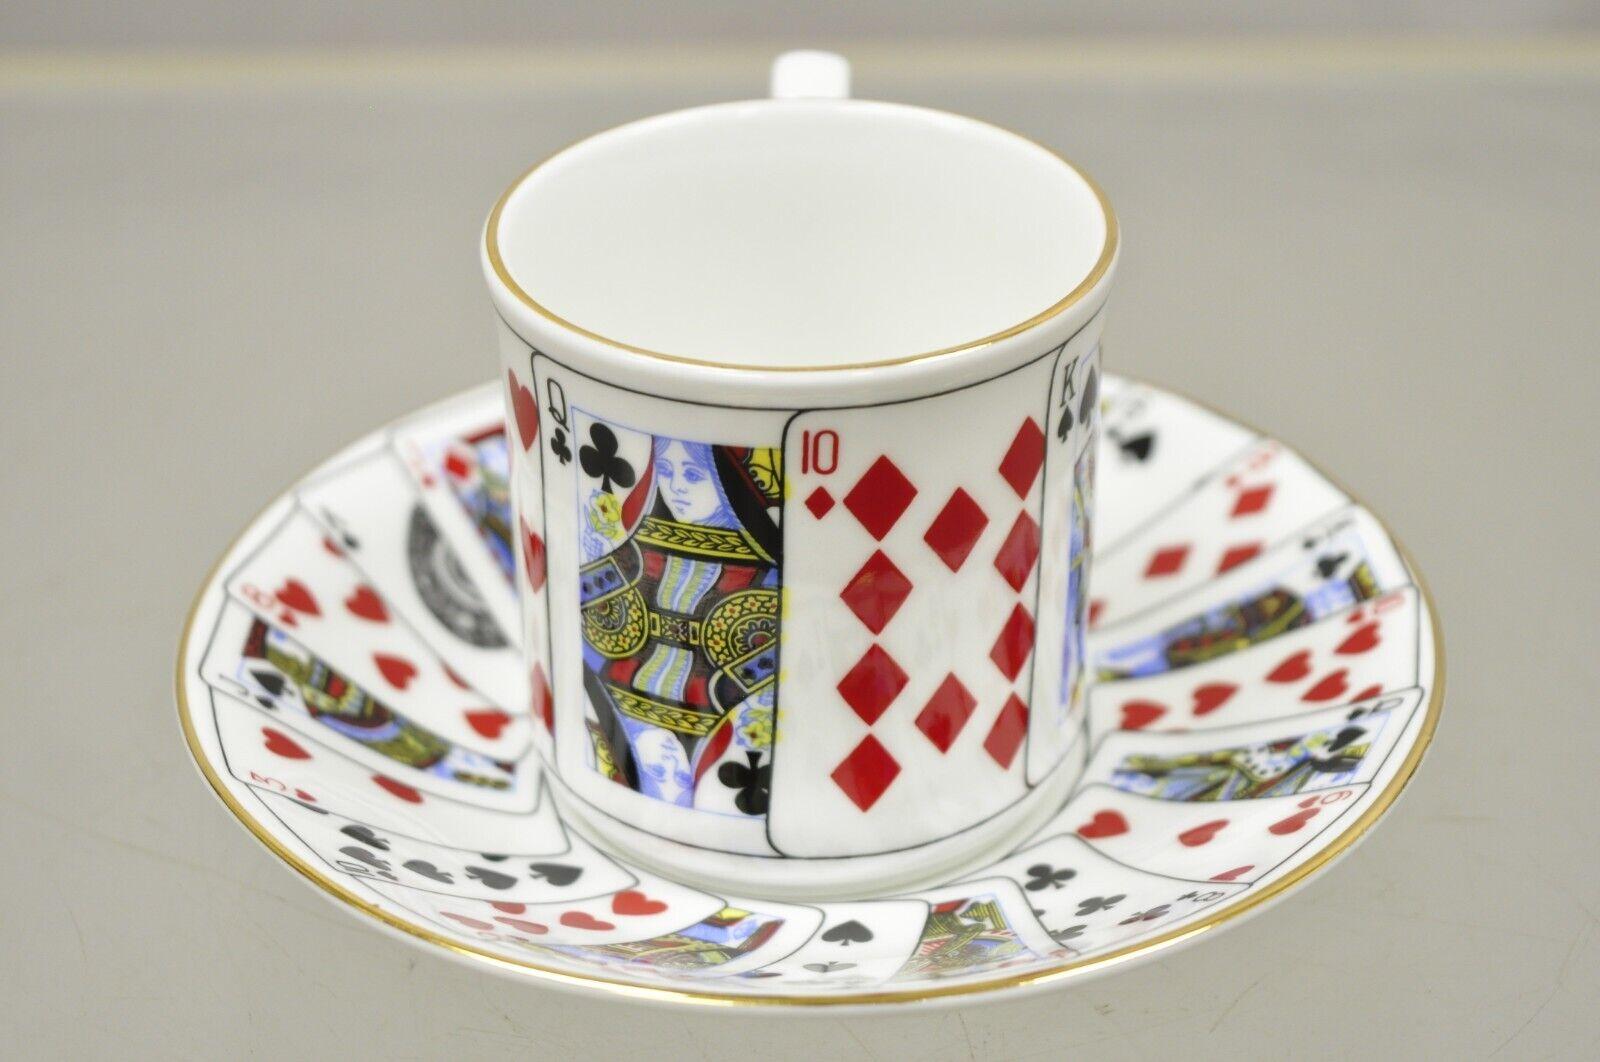 Tiffany & Co Staffordshire playing cards demitasse tea cup & saucer - Set of 4. Item features gold rim, playing card design, (4) cups, (4) saucers, original stamp, very nice vintage set. Circa Mid to late 20th century.
Measurements: 
Cup: 2.5